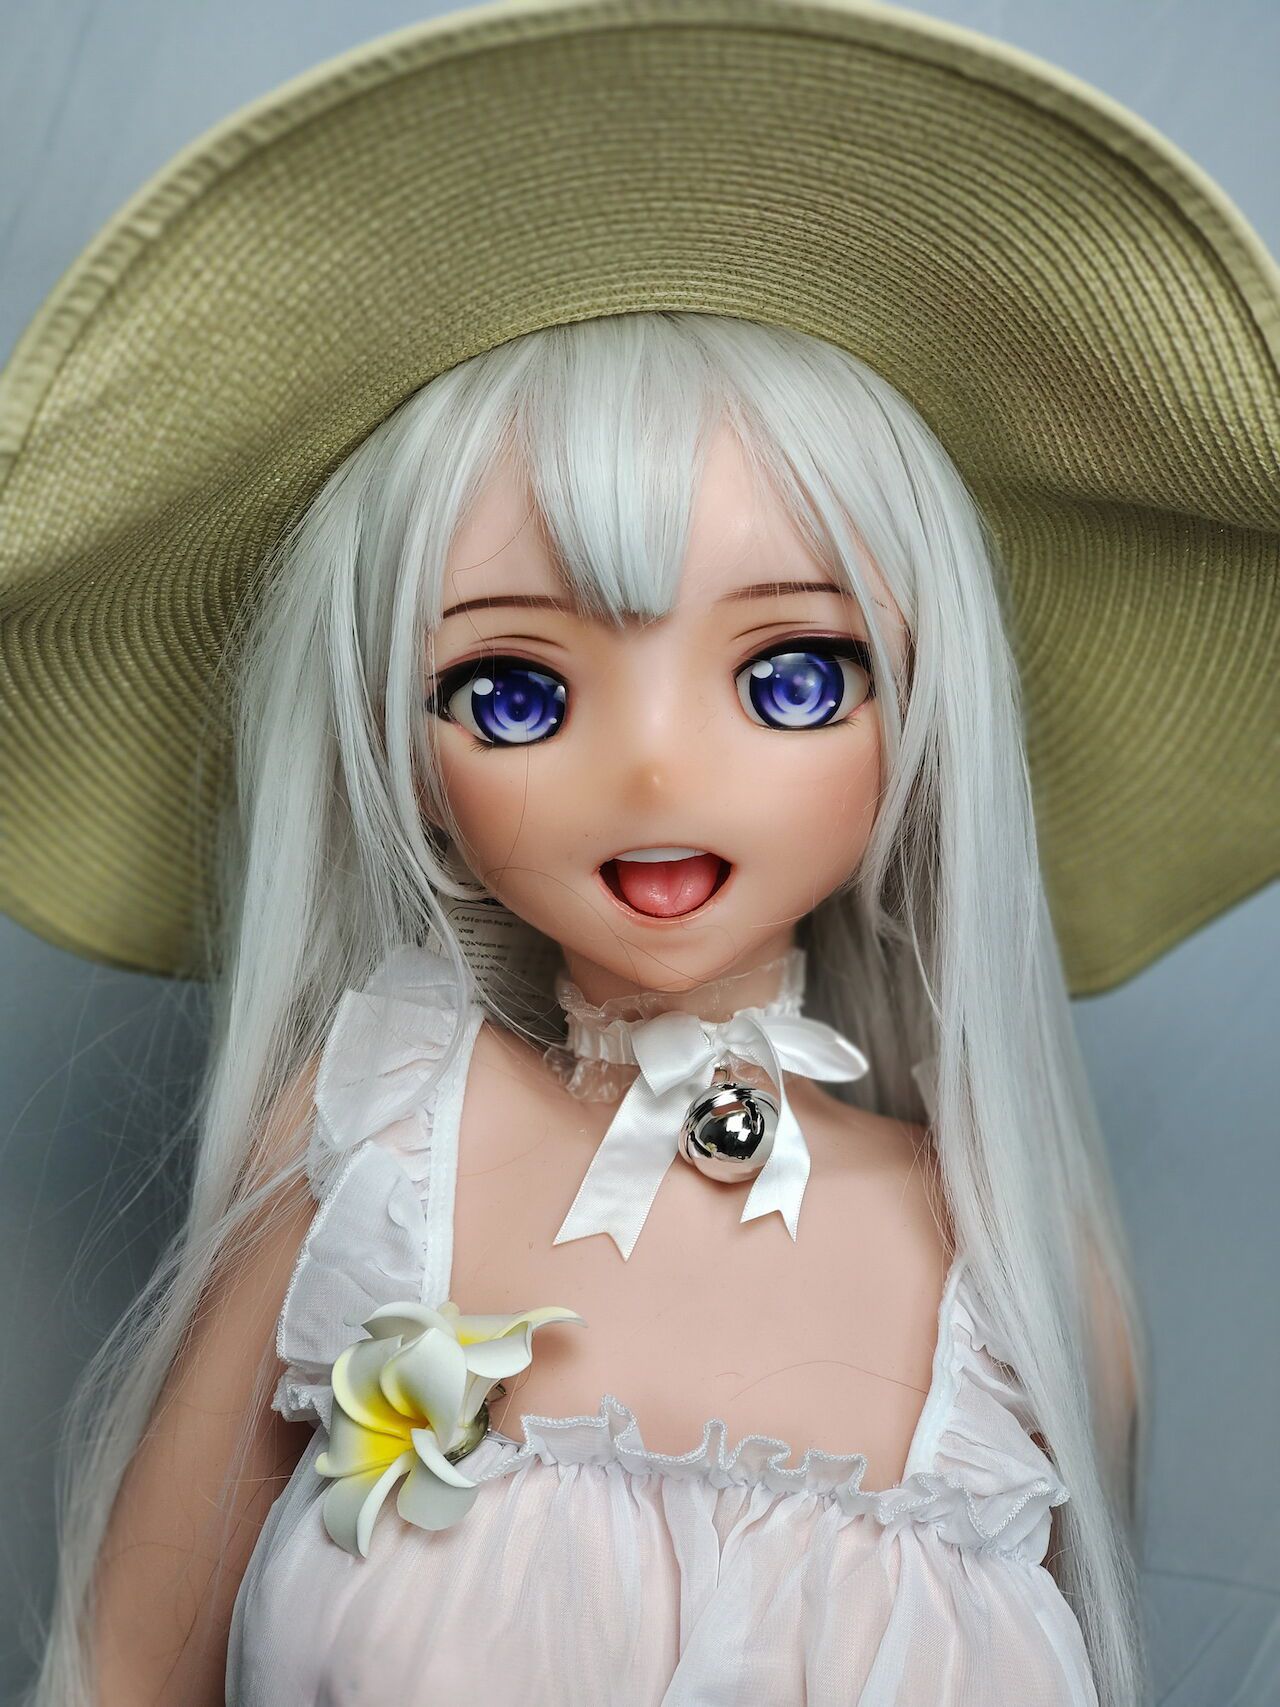 Elsa Babe's next anime doll is coming! AHR001 6